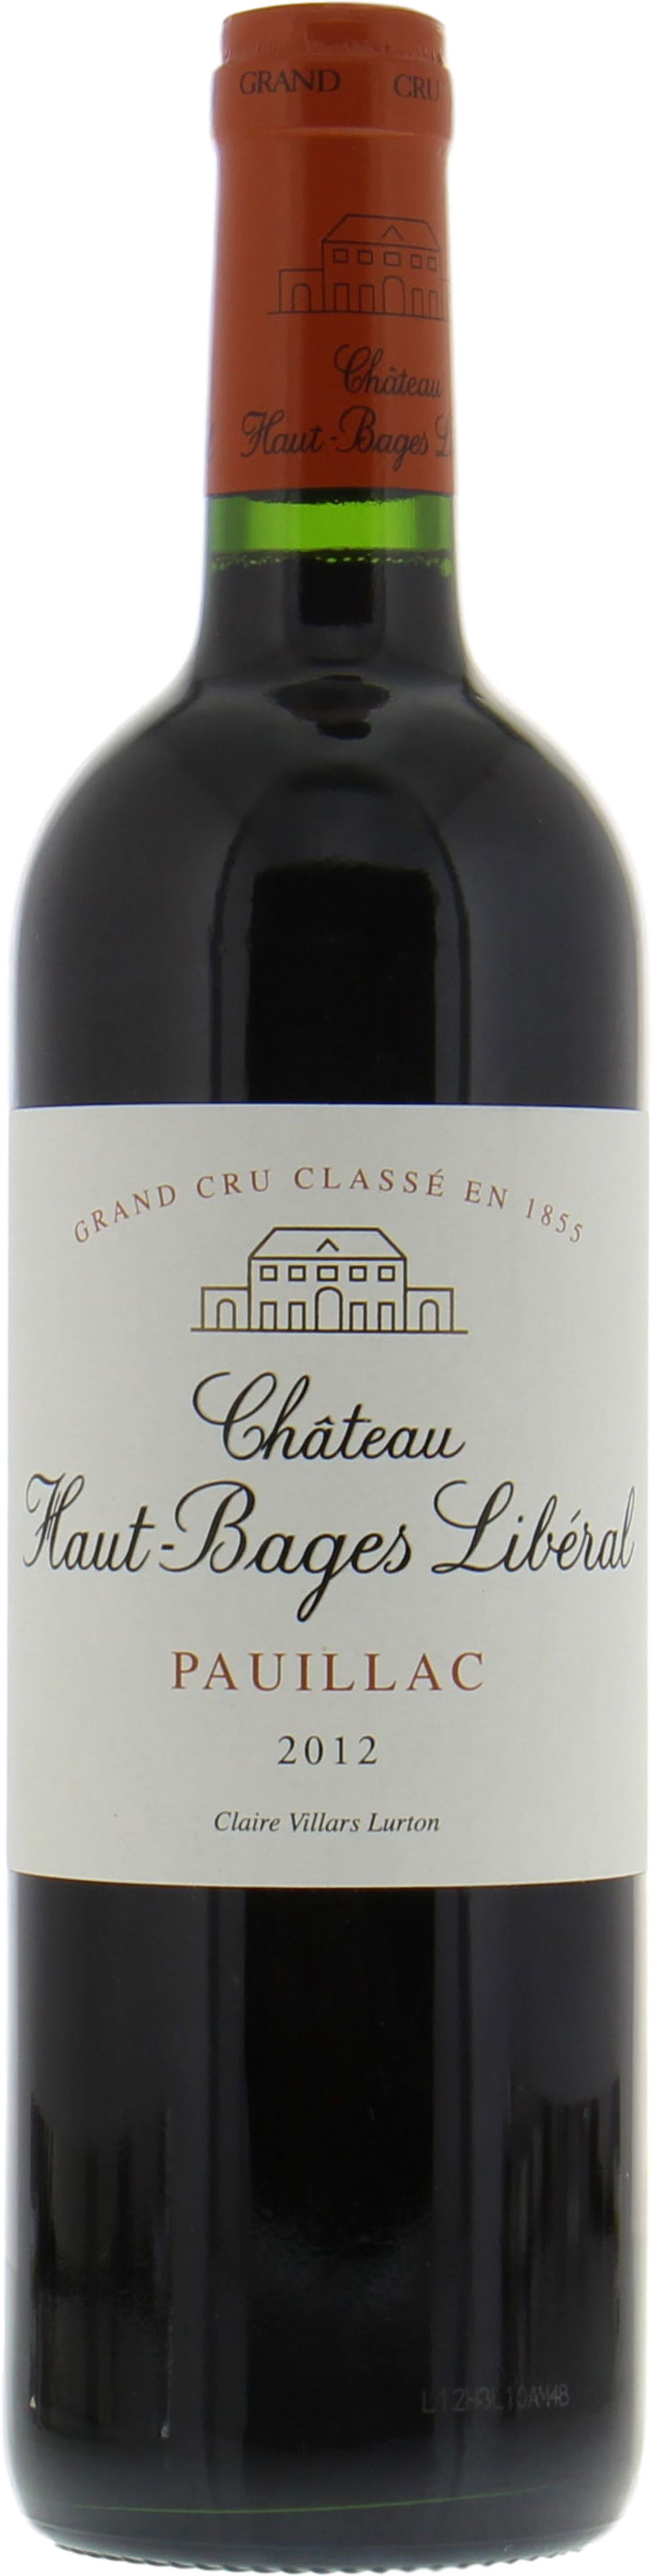 Chateau Haut Bages Liberal - Chateau Haut Bages Liberal 2012 Perfect